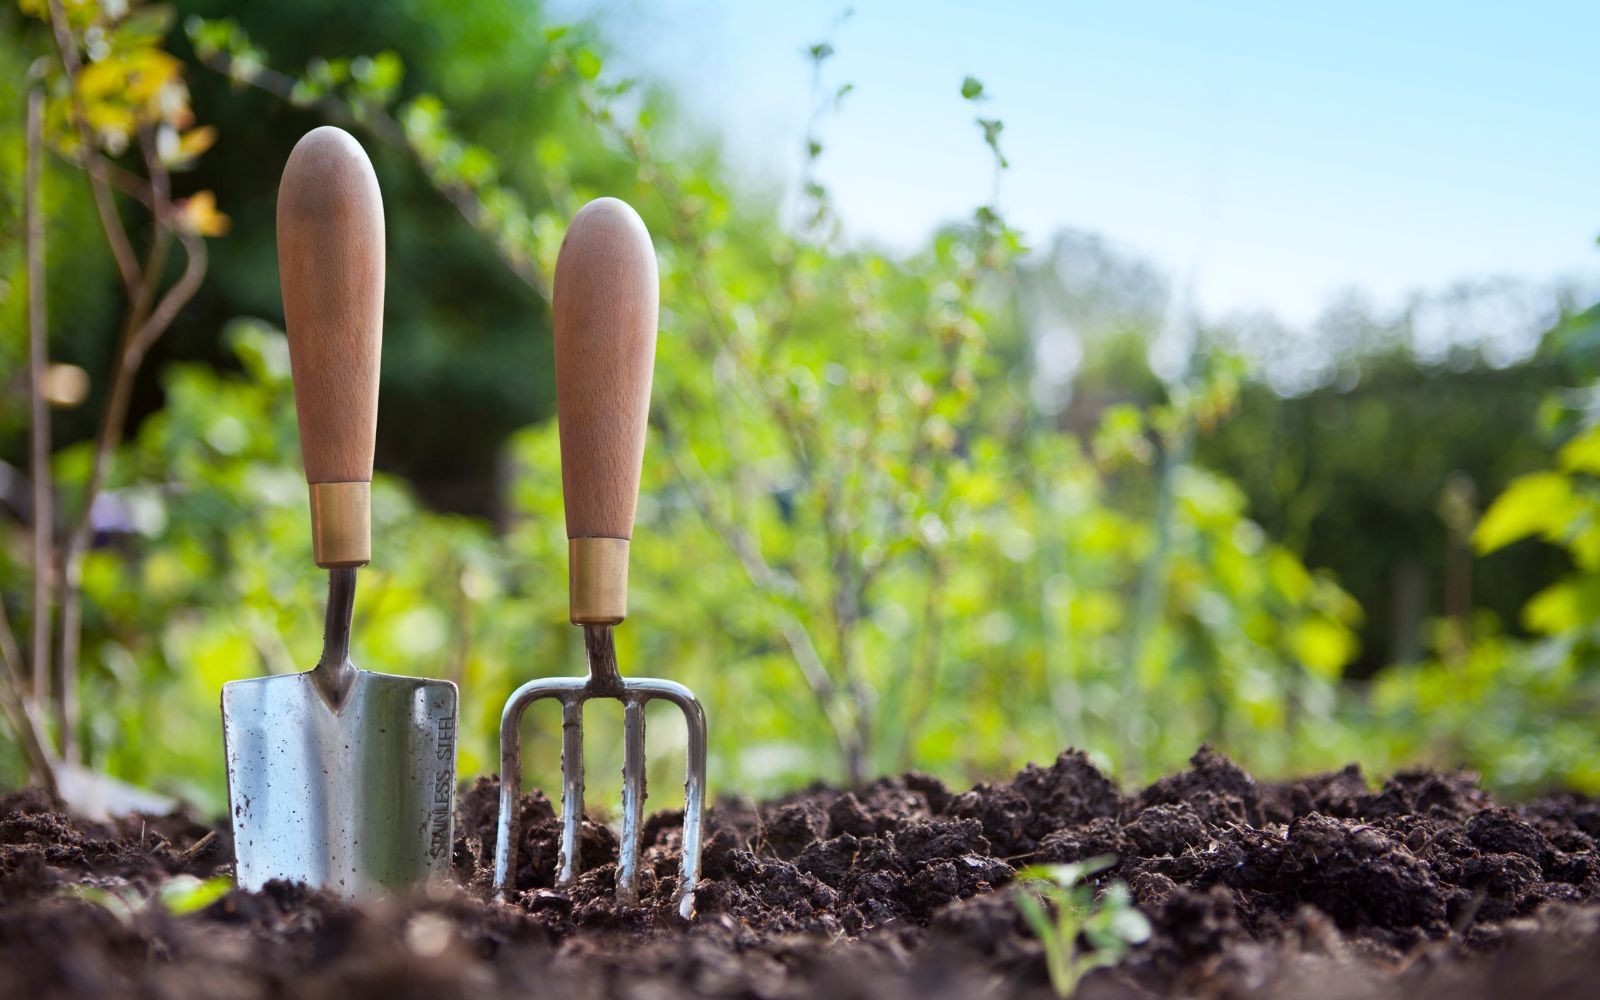 Gardening Tools to Get Started